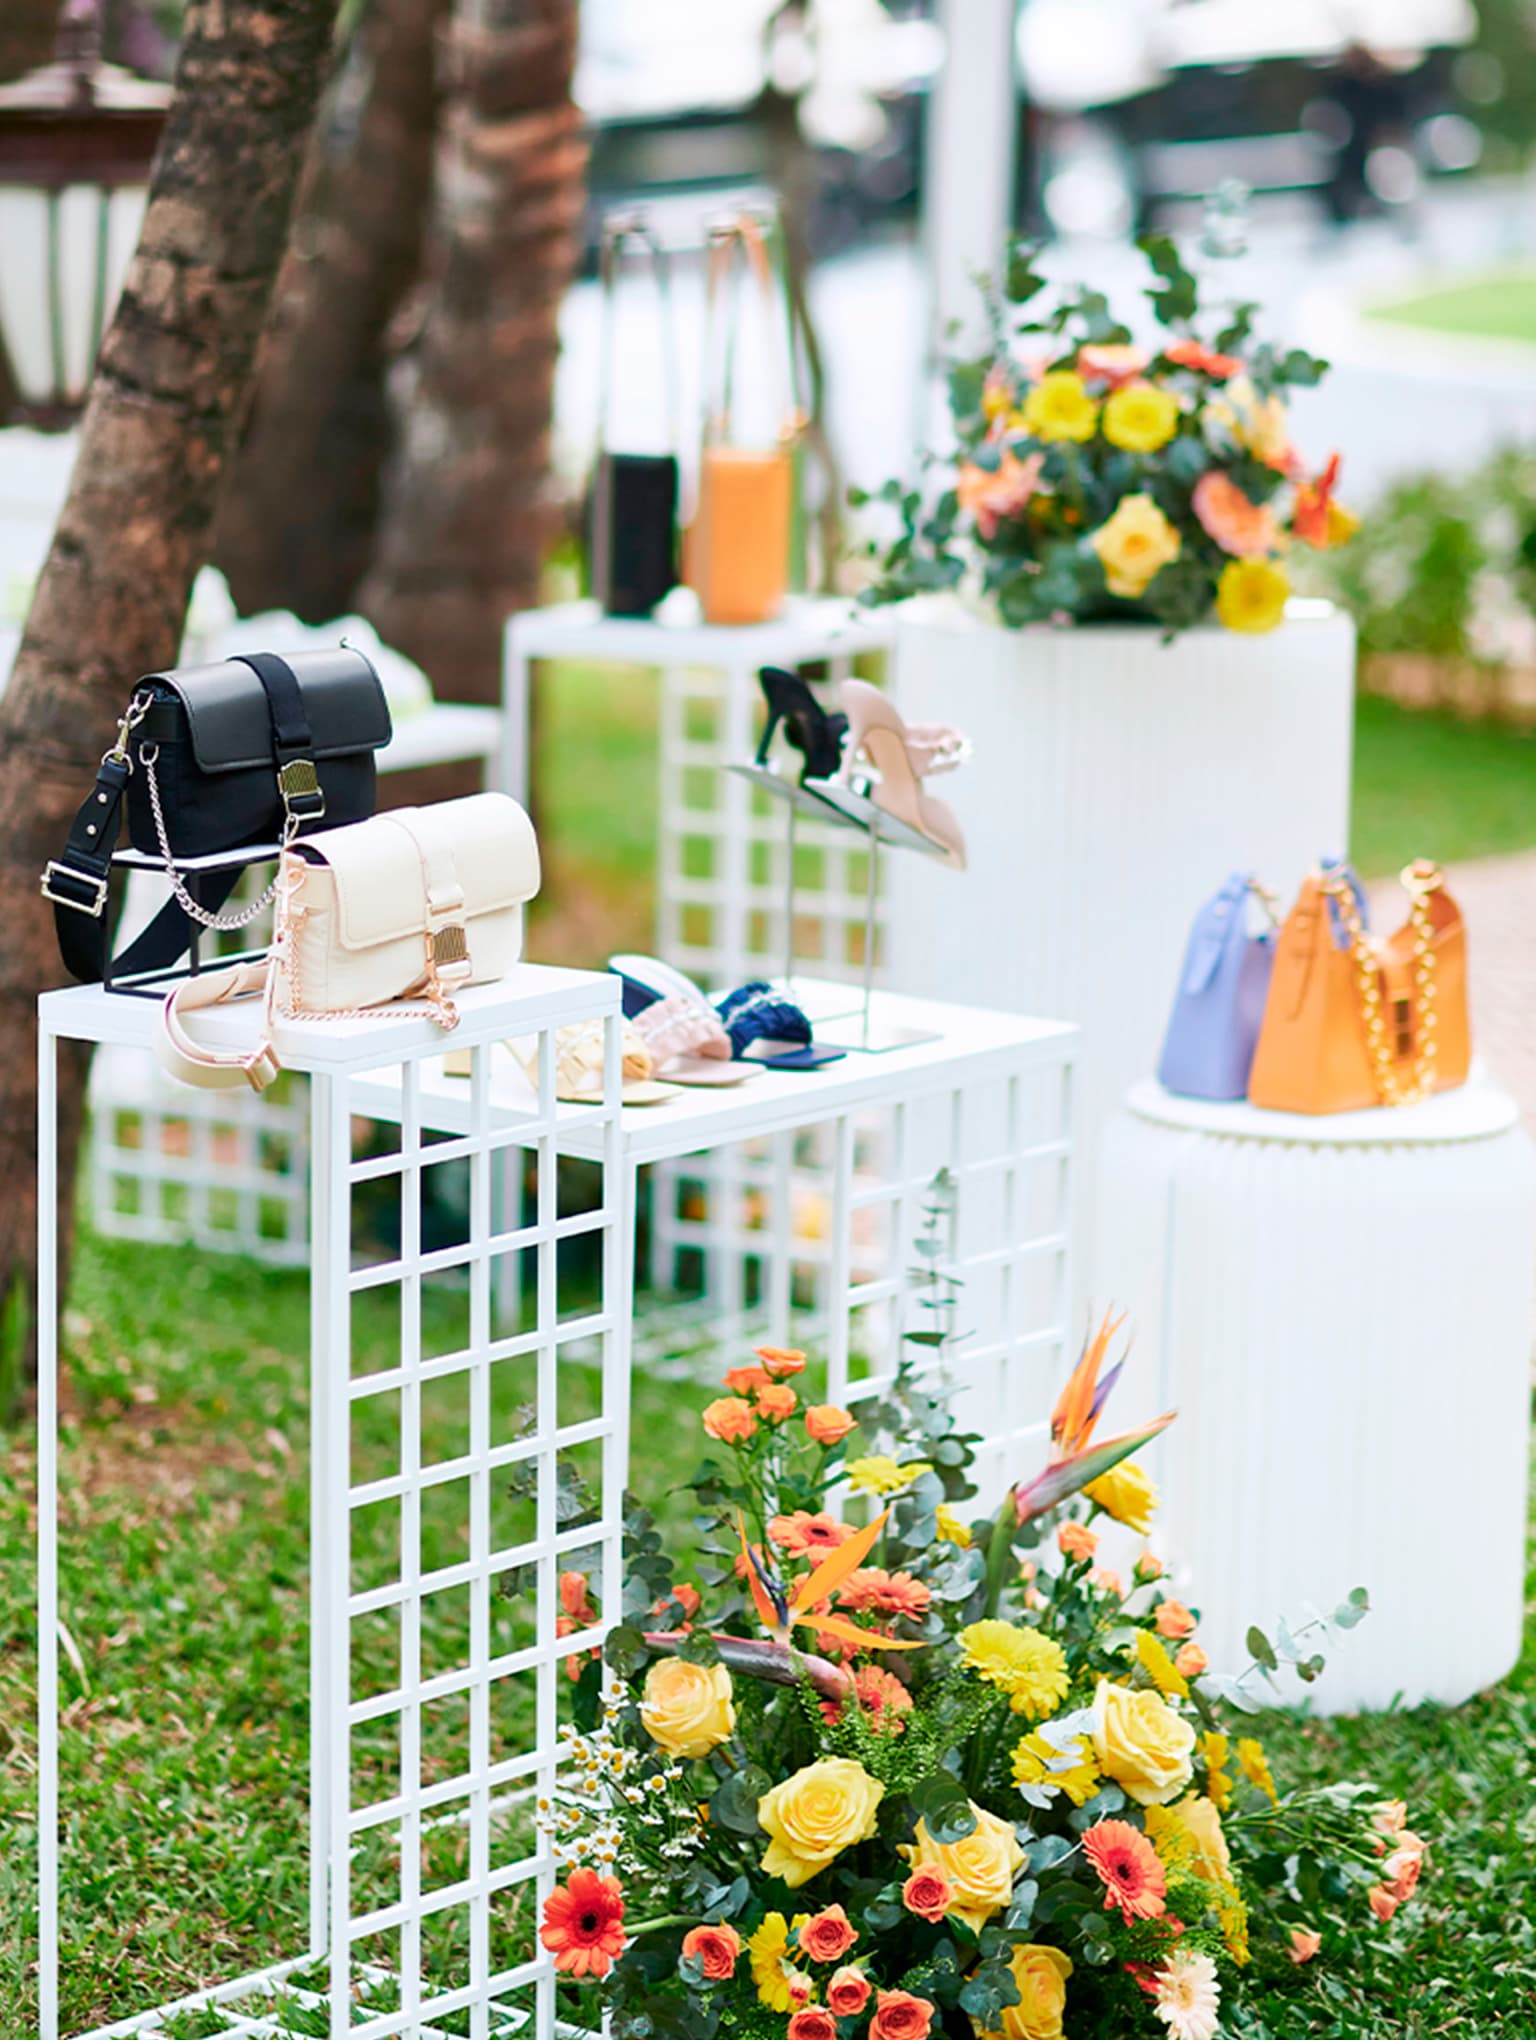 Product display at CHARLES & KEITH’s ‘Blooming Spring’ launch event in Phnom Penh, Cambodia (close up)